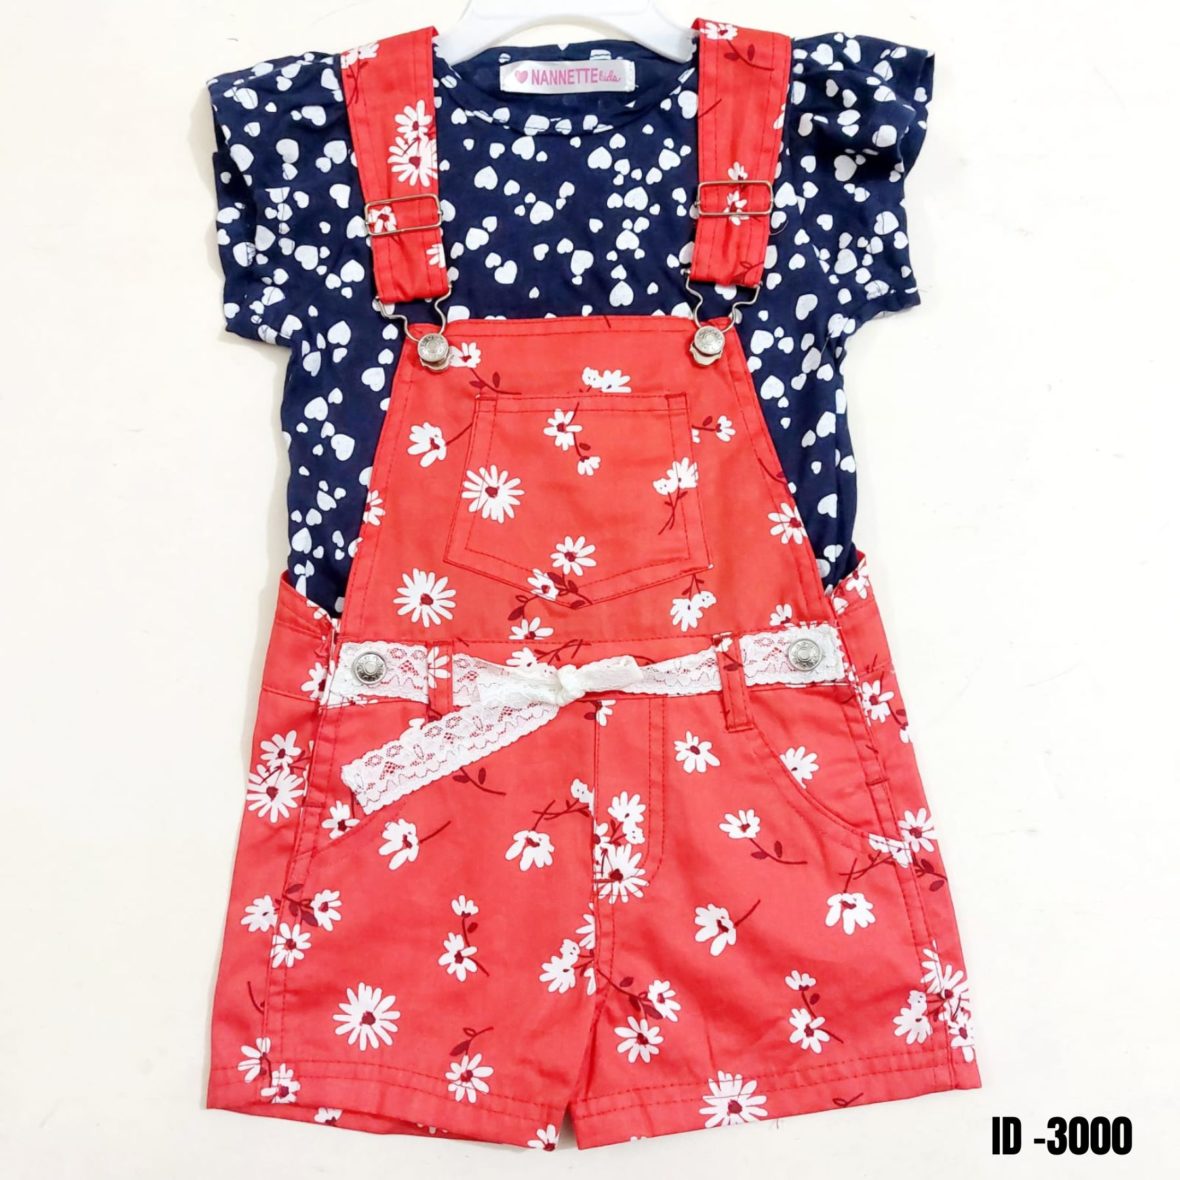 New fancy red mixed flower rumper with blue t-shirt